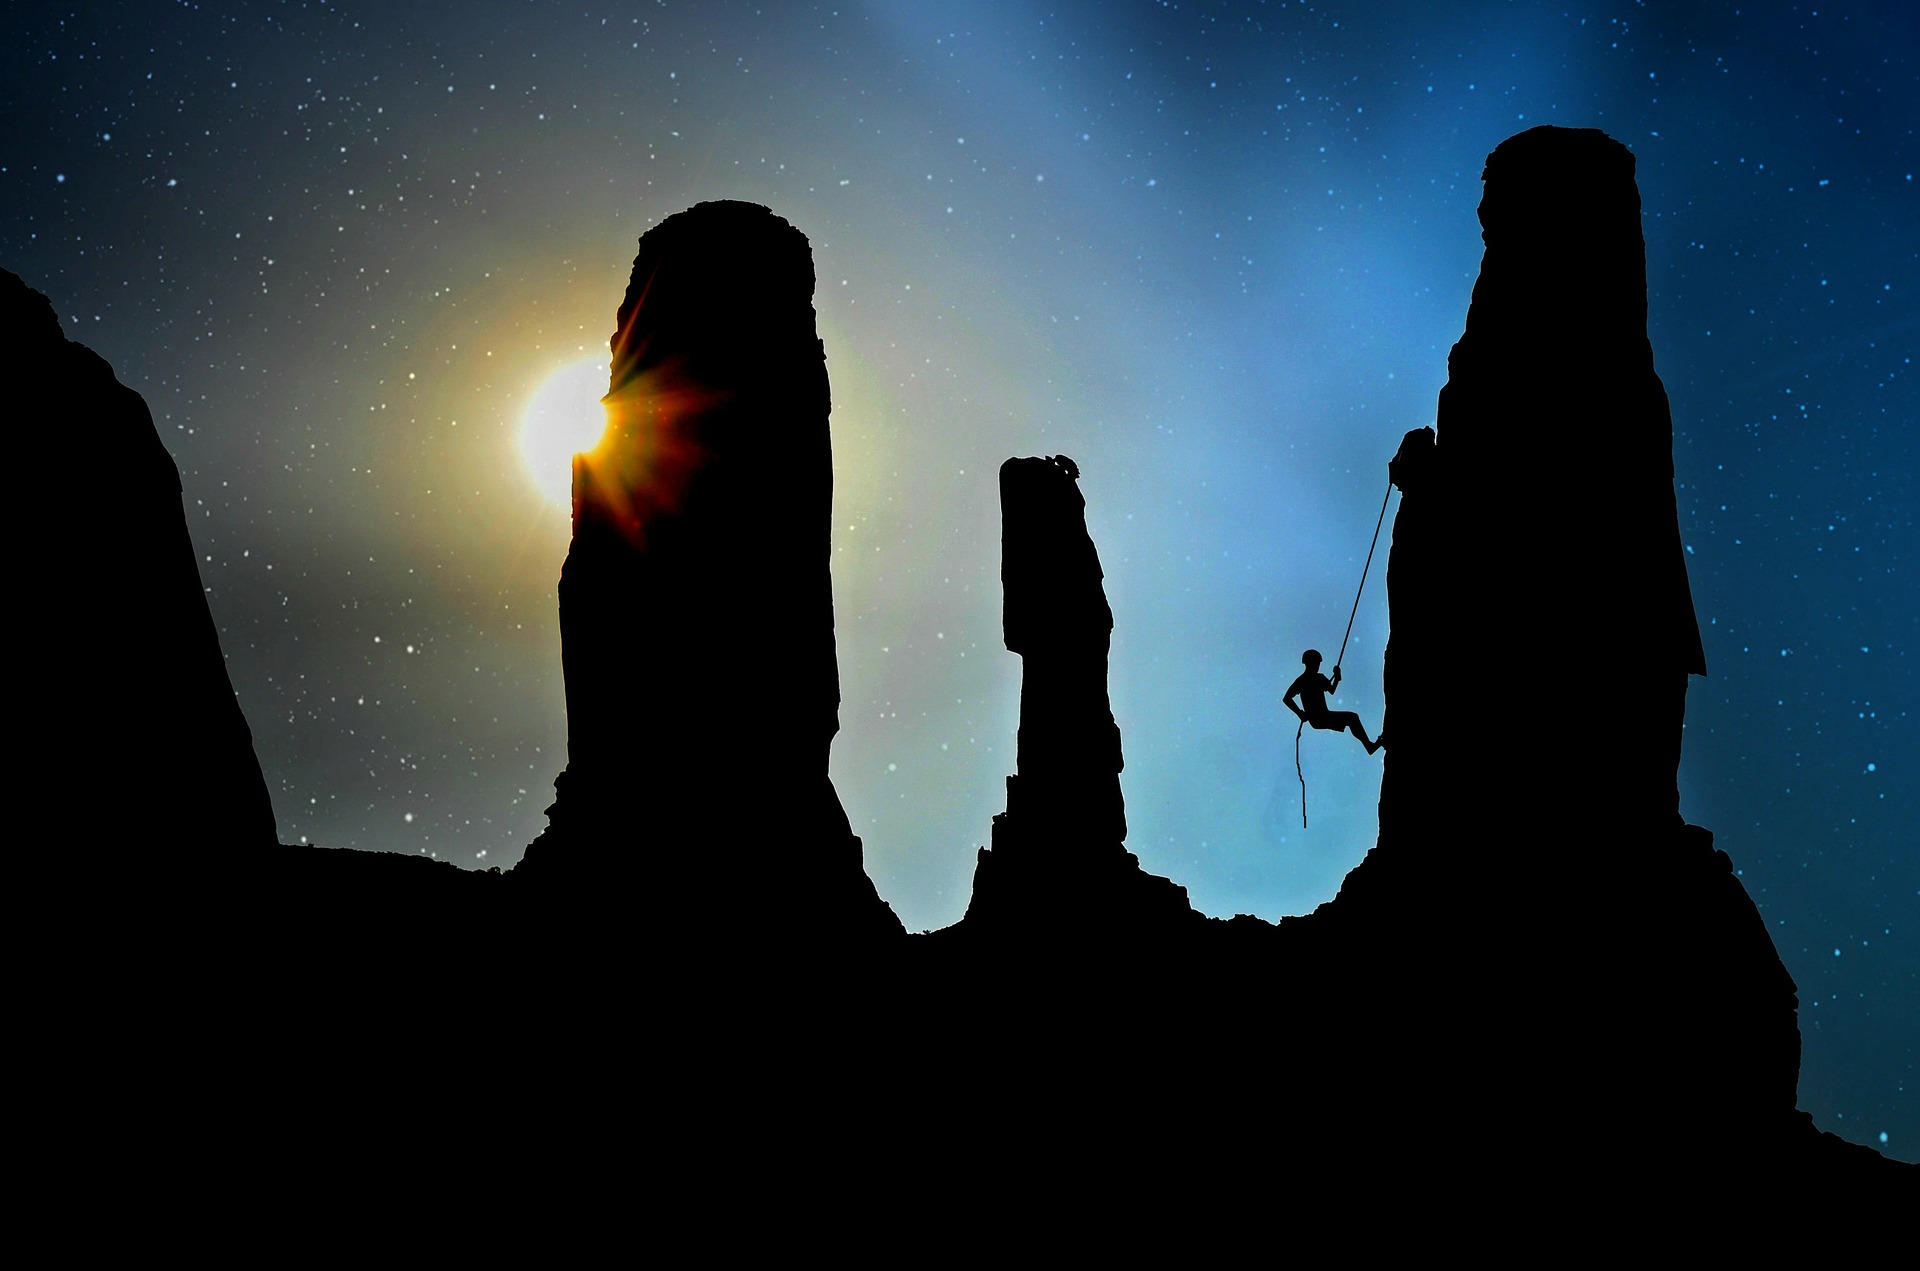 A silhouette of a person climbing against a starry sky